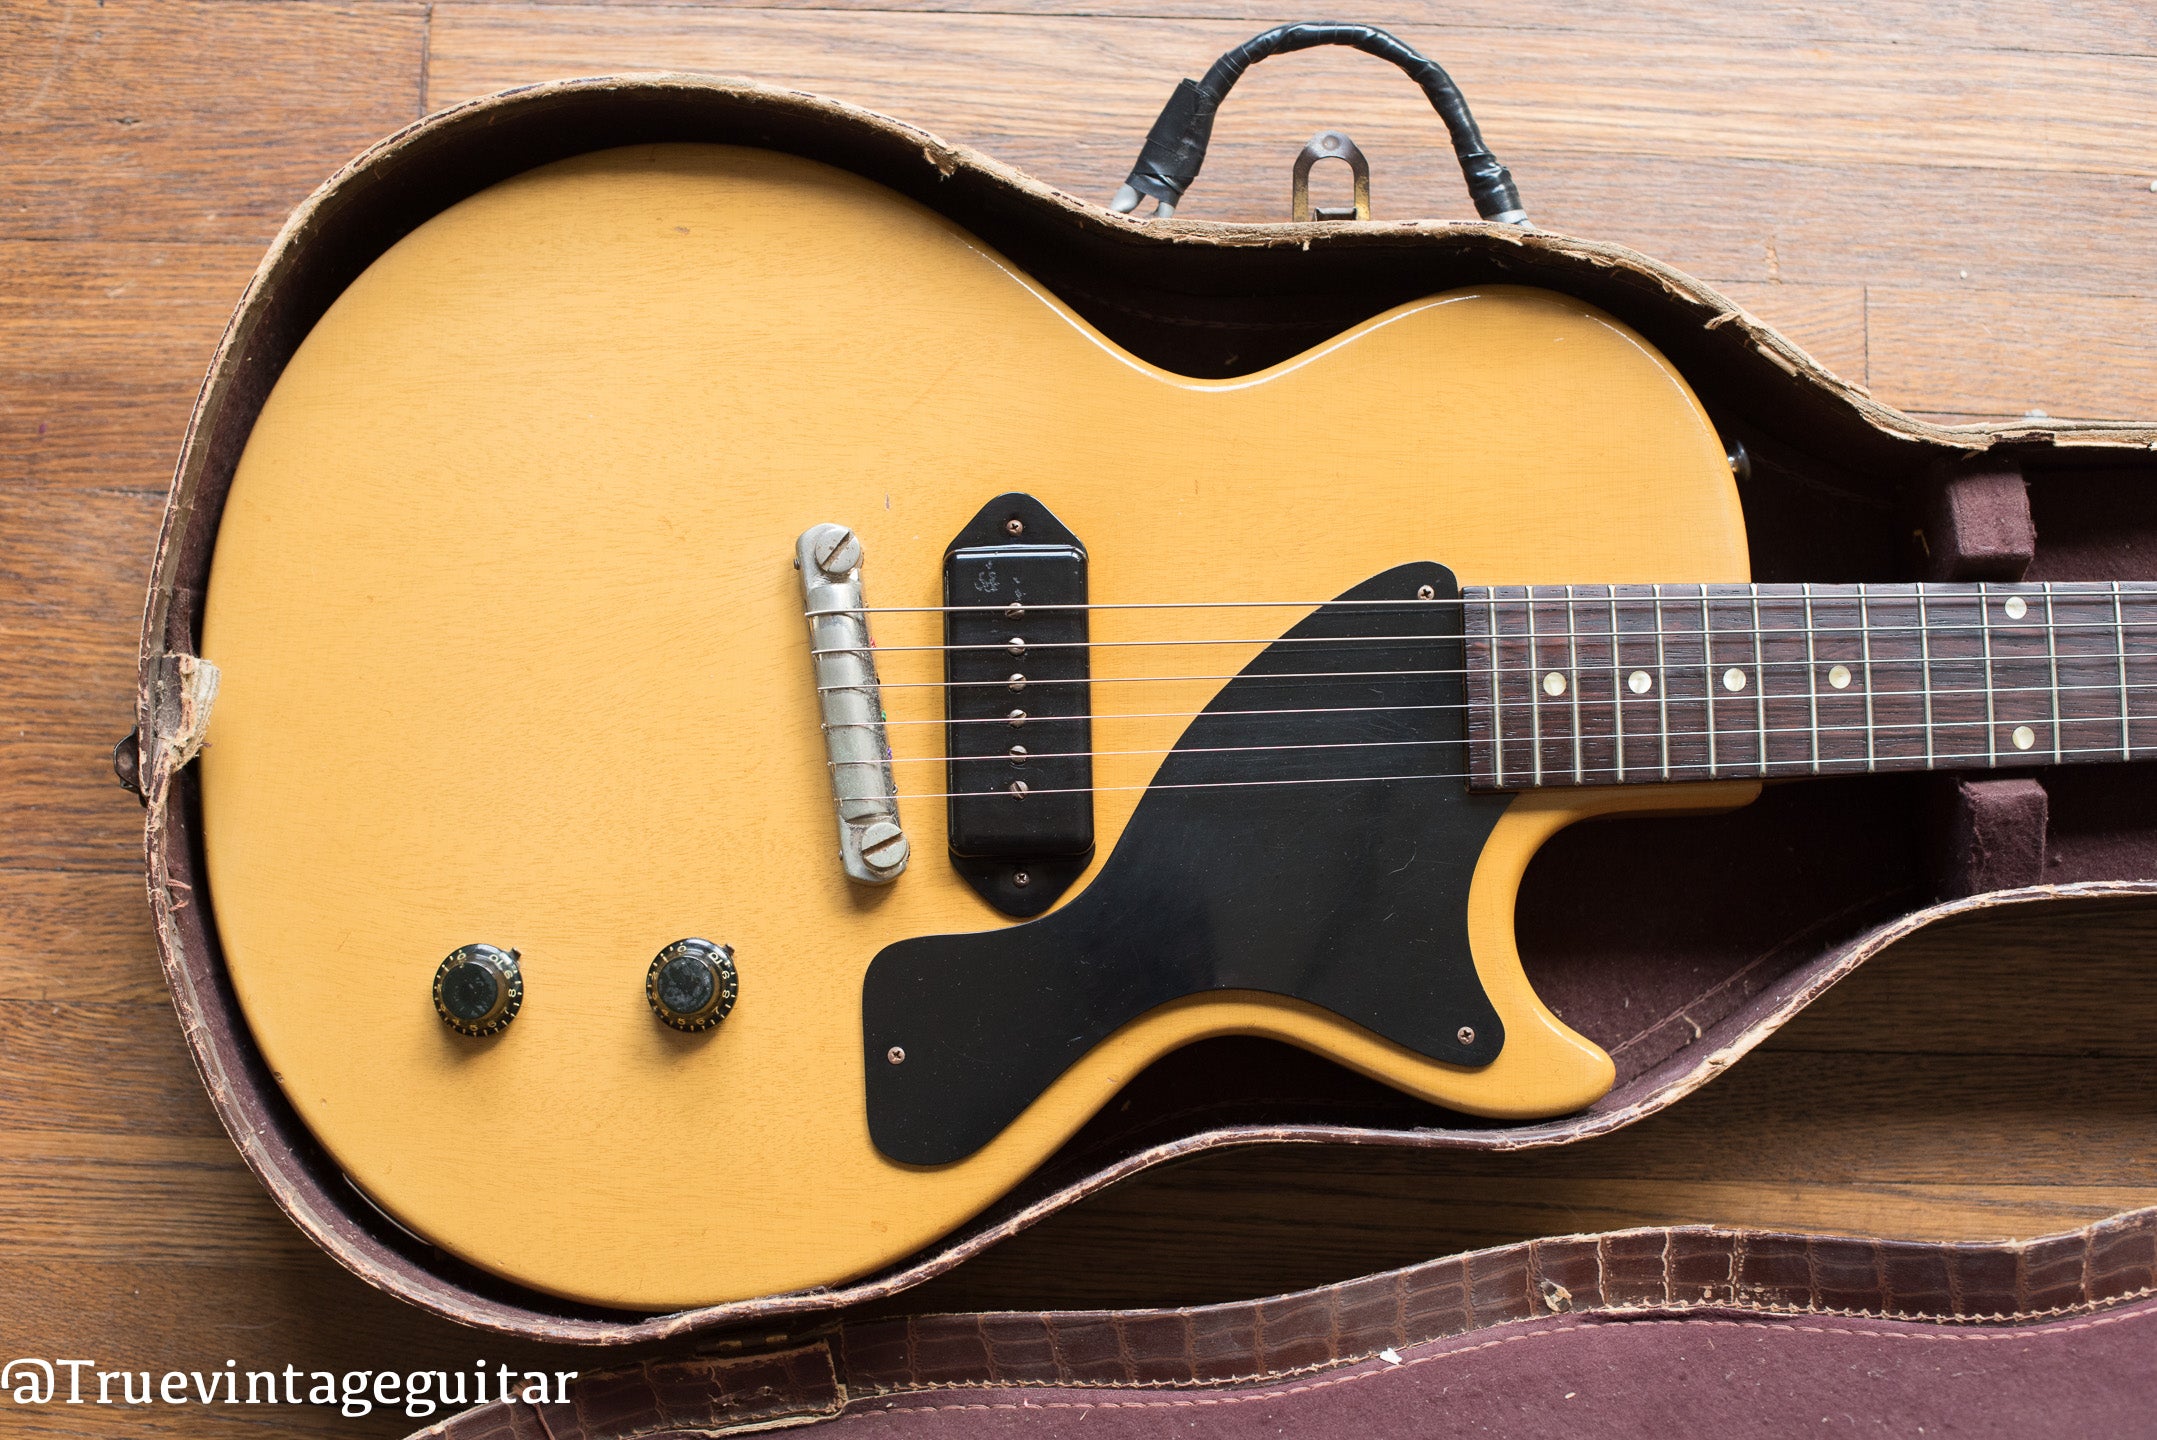 Vintage 1957 Gibson Les Paul yellow guitar